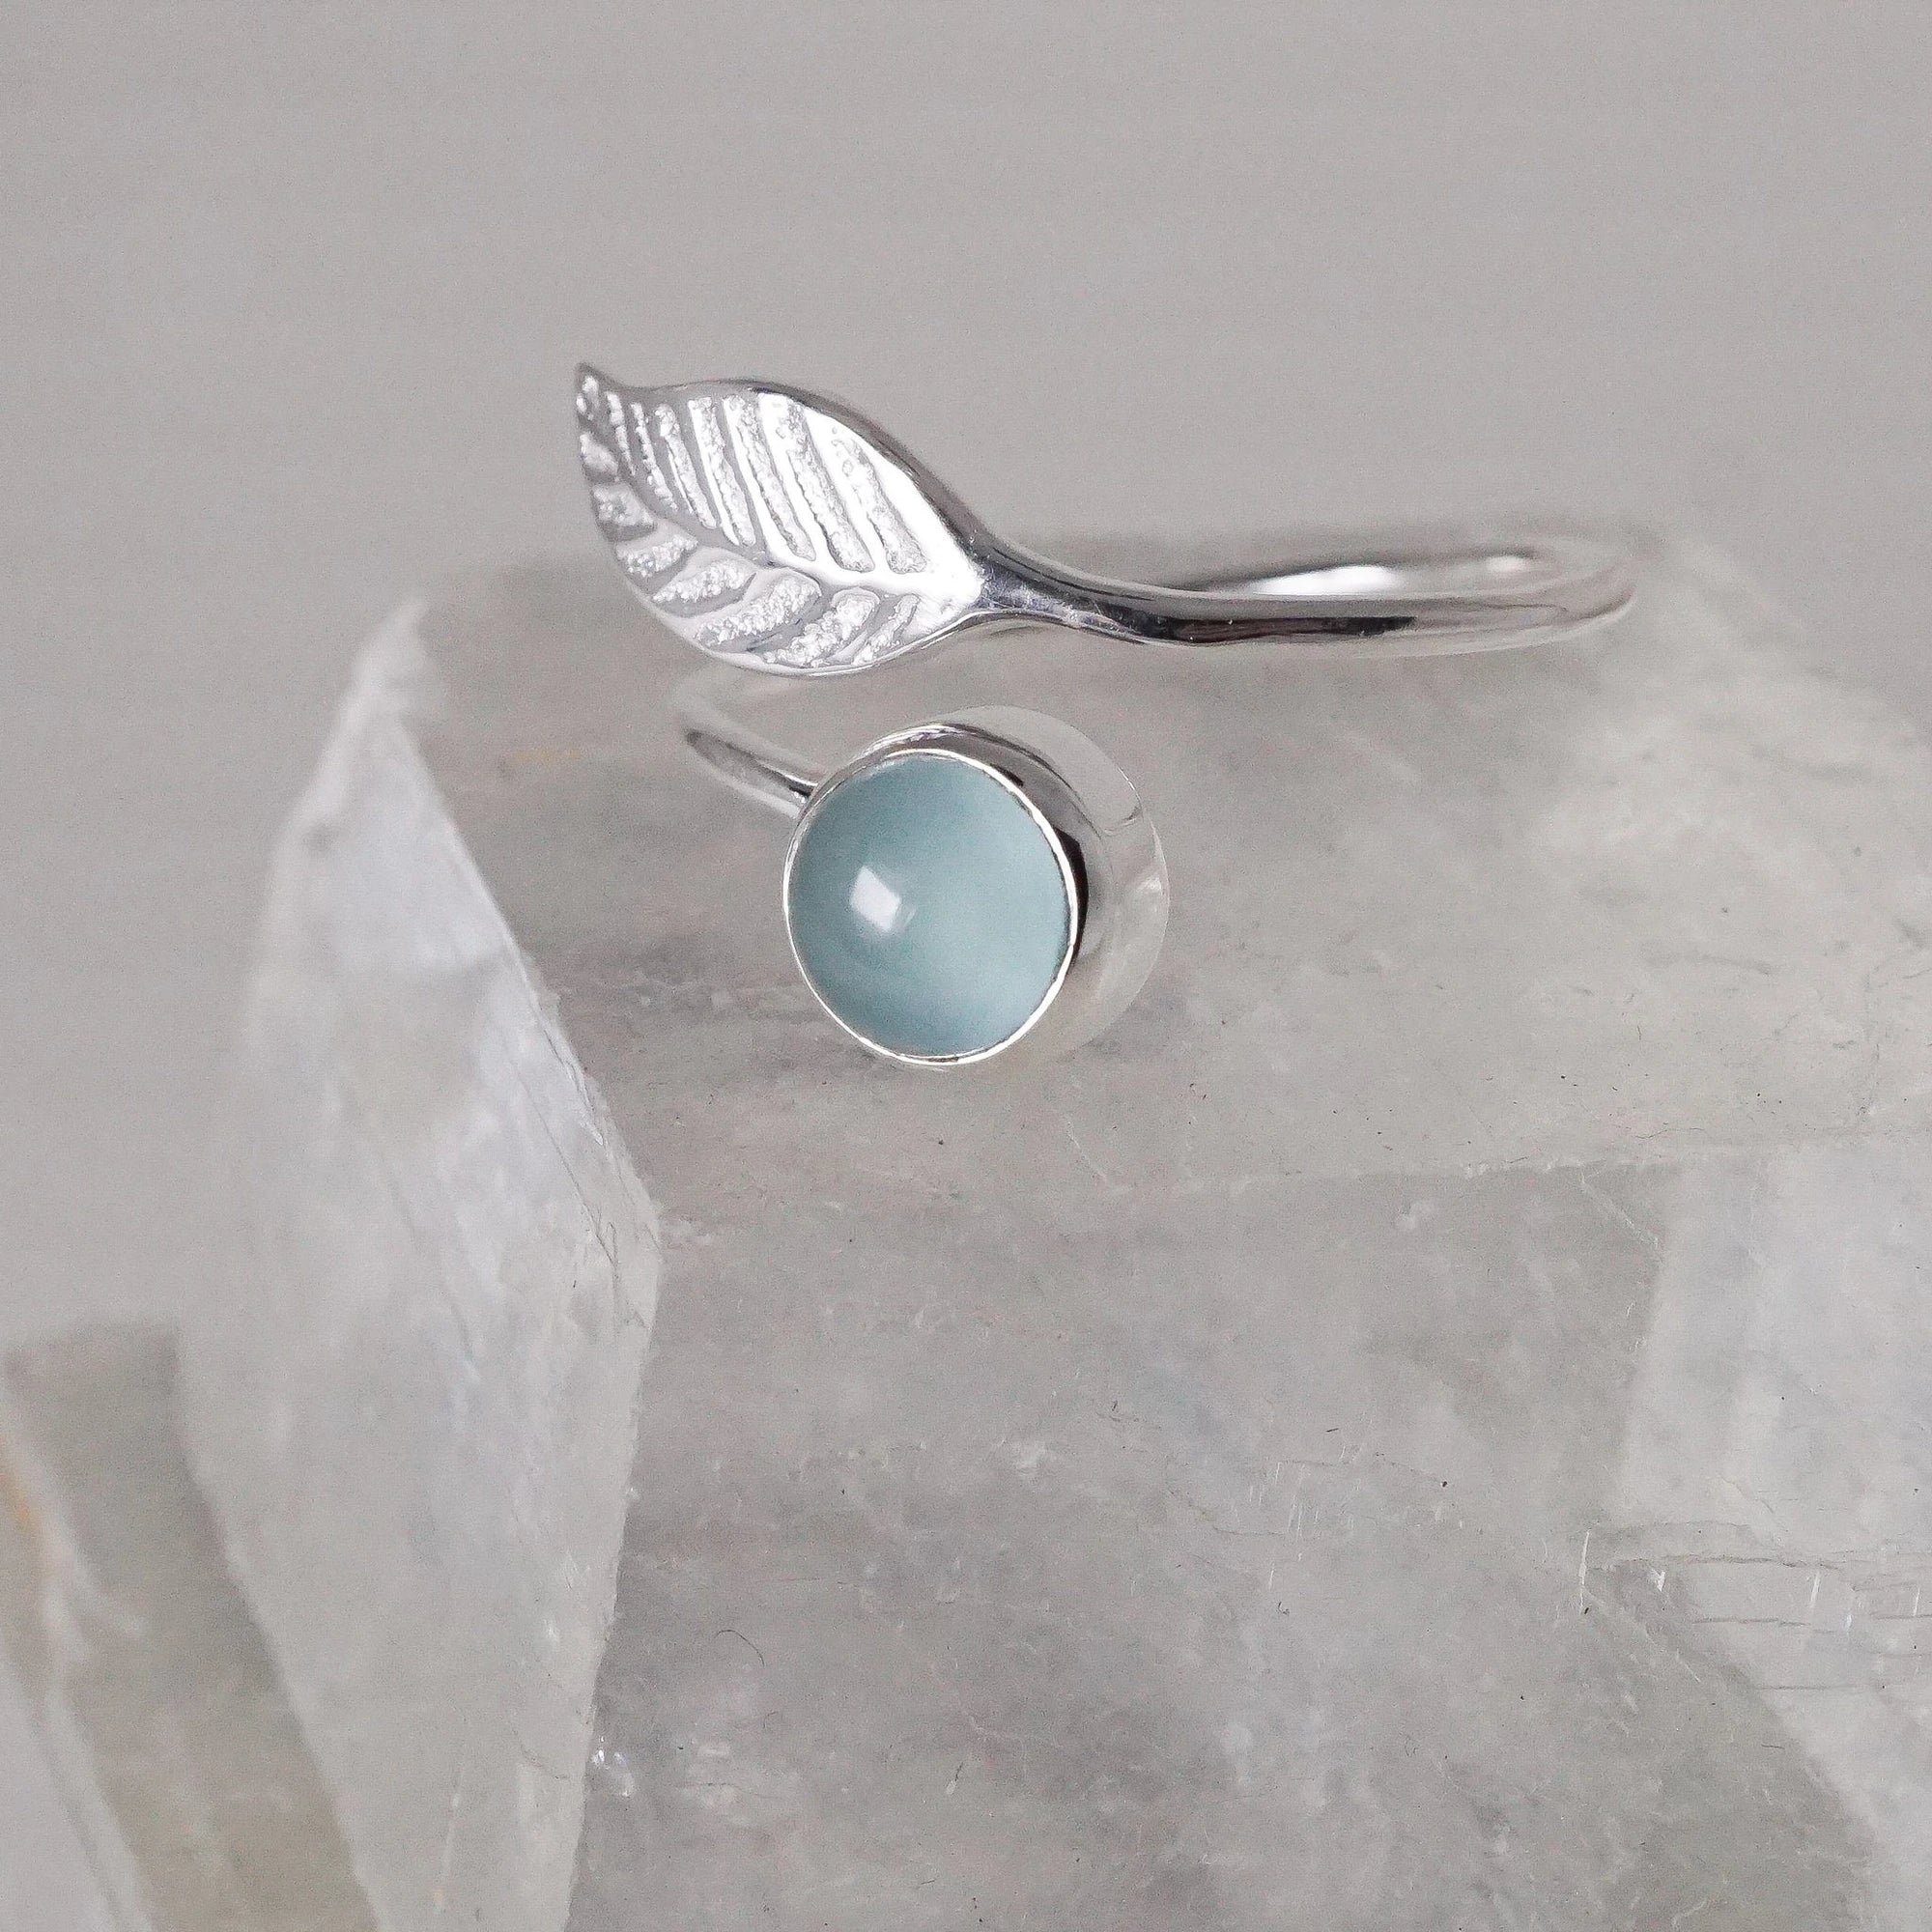 Garden of Desire - Leaf and Stone Ring Handcrafted Apatite and Garnet with Sterling Silver 92.5, this ring wraps around your finger very gently and lightly, like a feather. Perfect for everyday to impress.